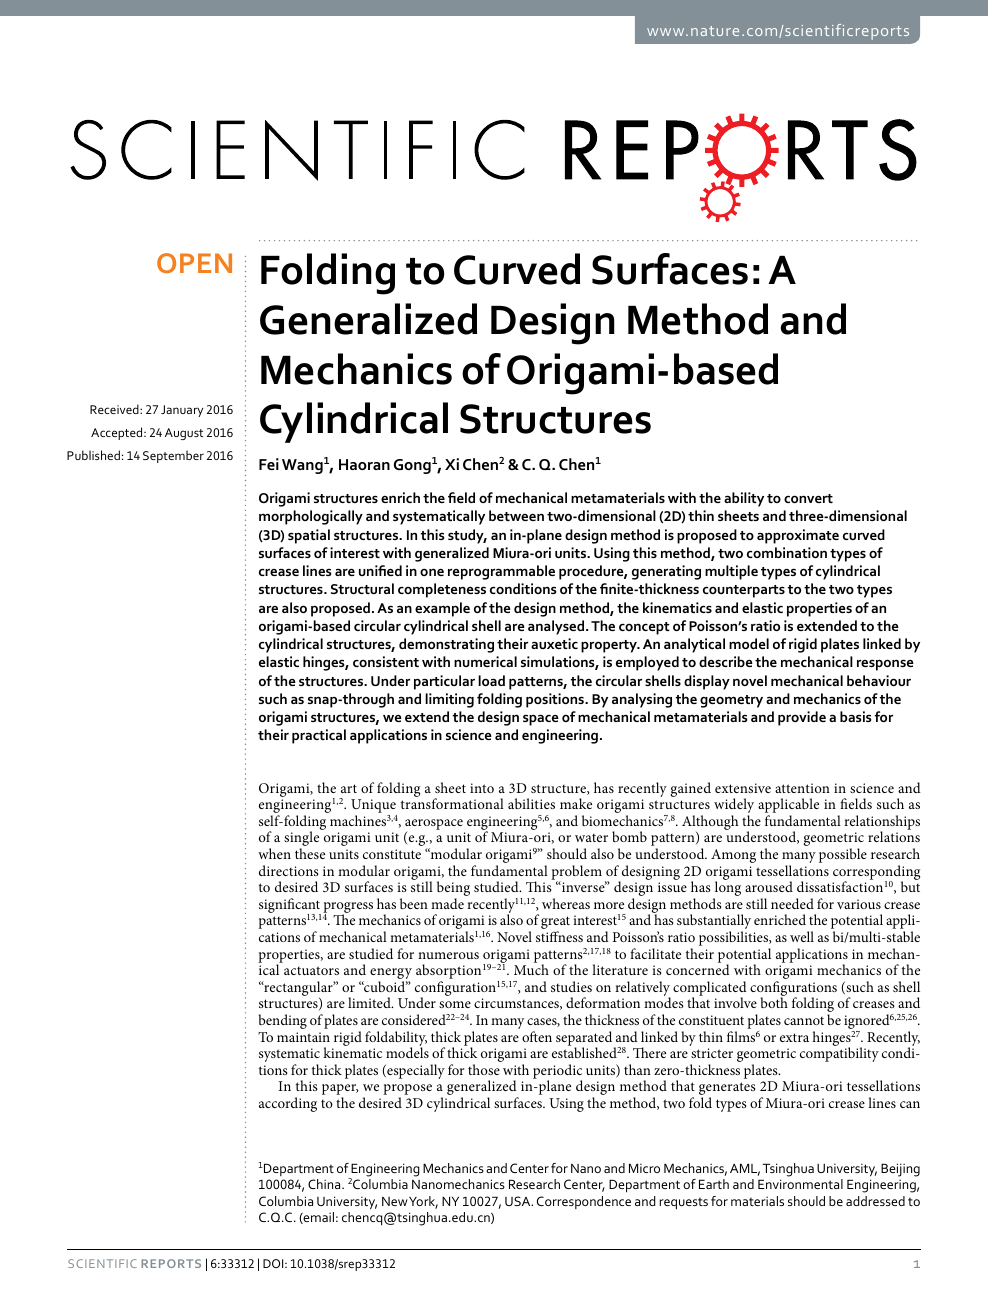 Folding To Curved Surfaces A Generalized Design Method And